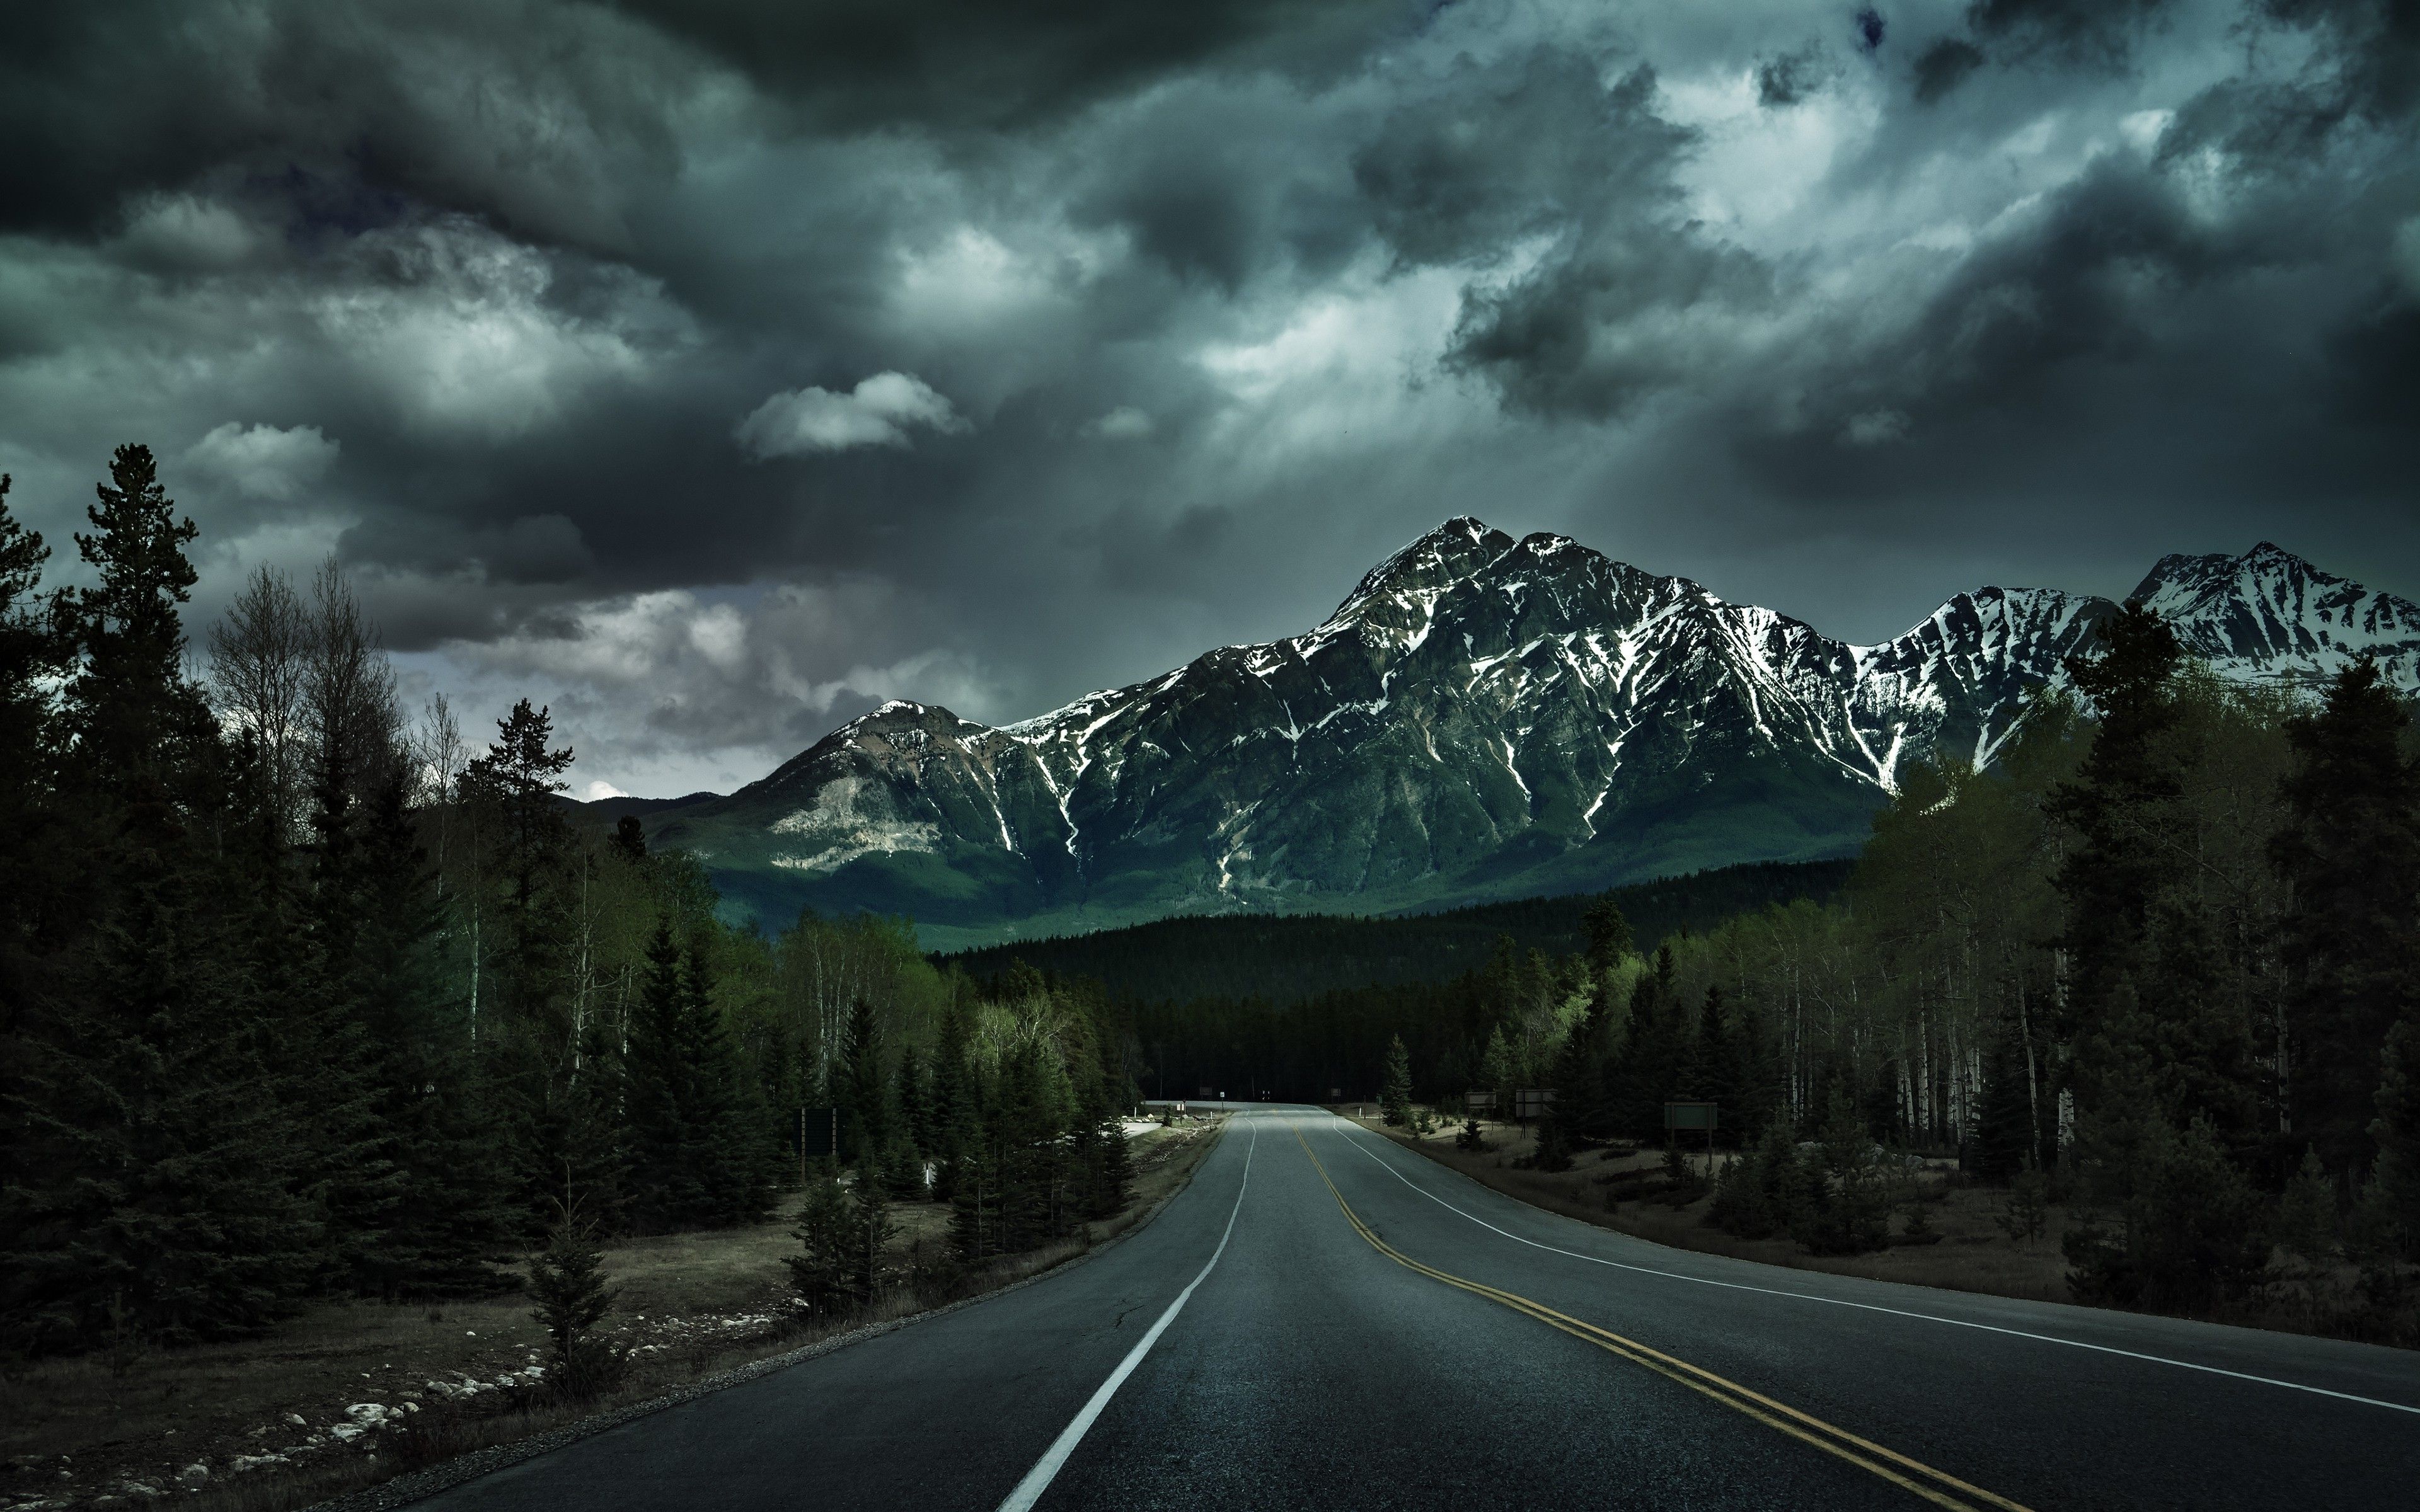 Wallpaper, 3840x2400 px, Canada, clouds, dark, forest, hill, landscape, lines, mountain, nature, pine trees, road sign, snowy peak 3840x2400